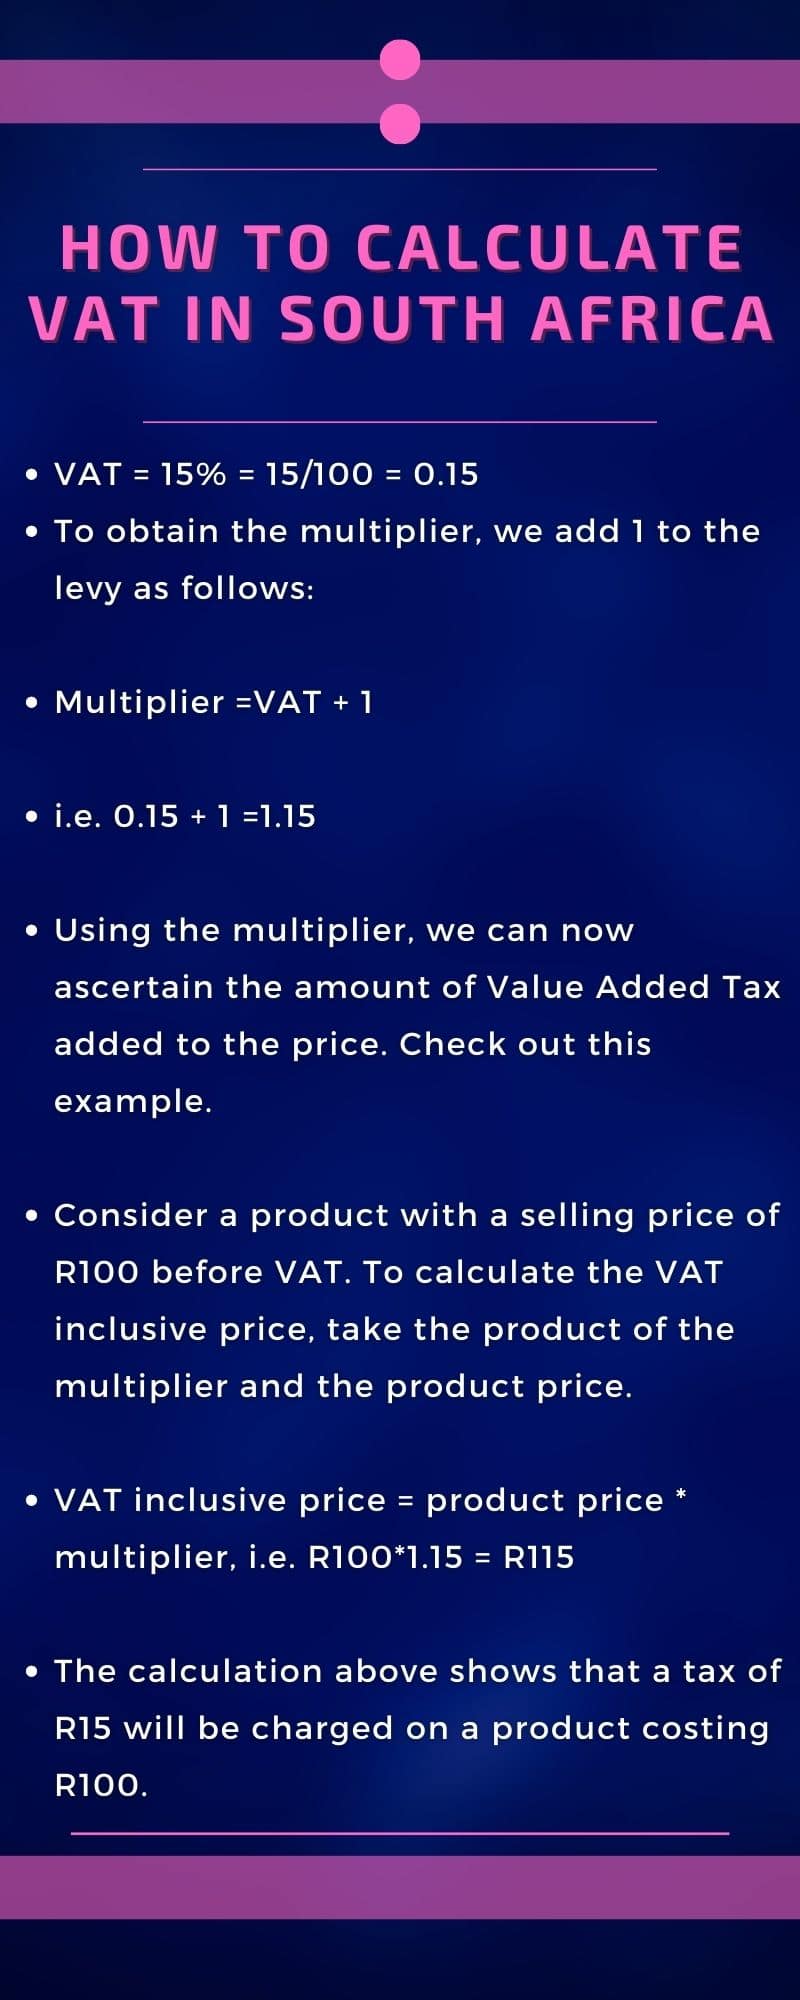 How to calculate VAT in South Africa